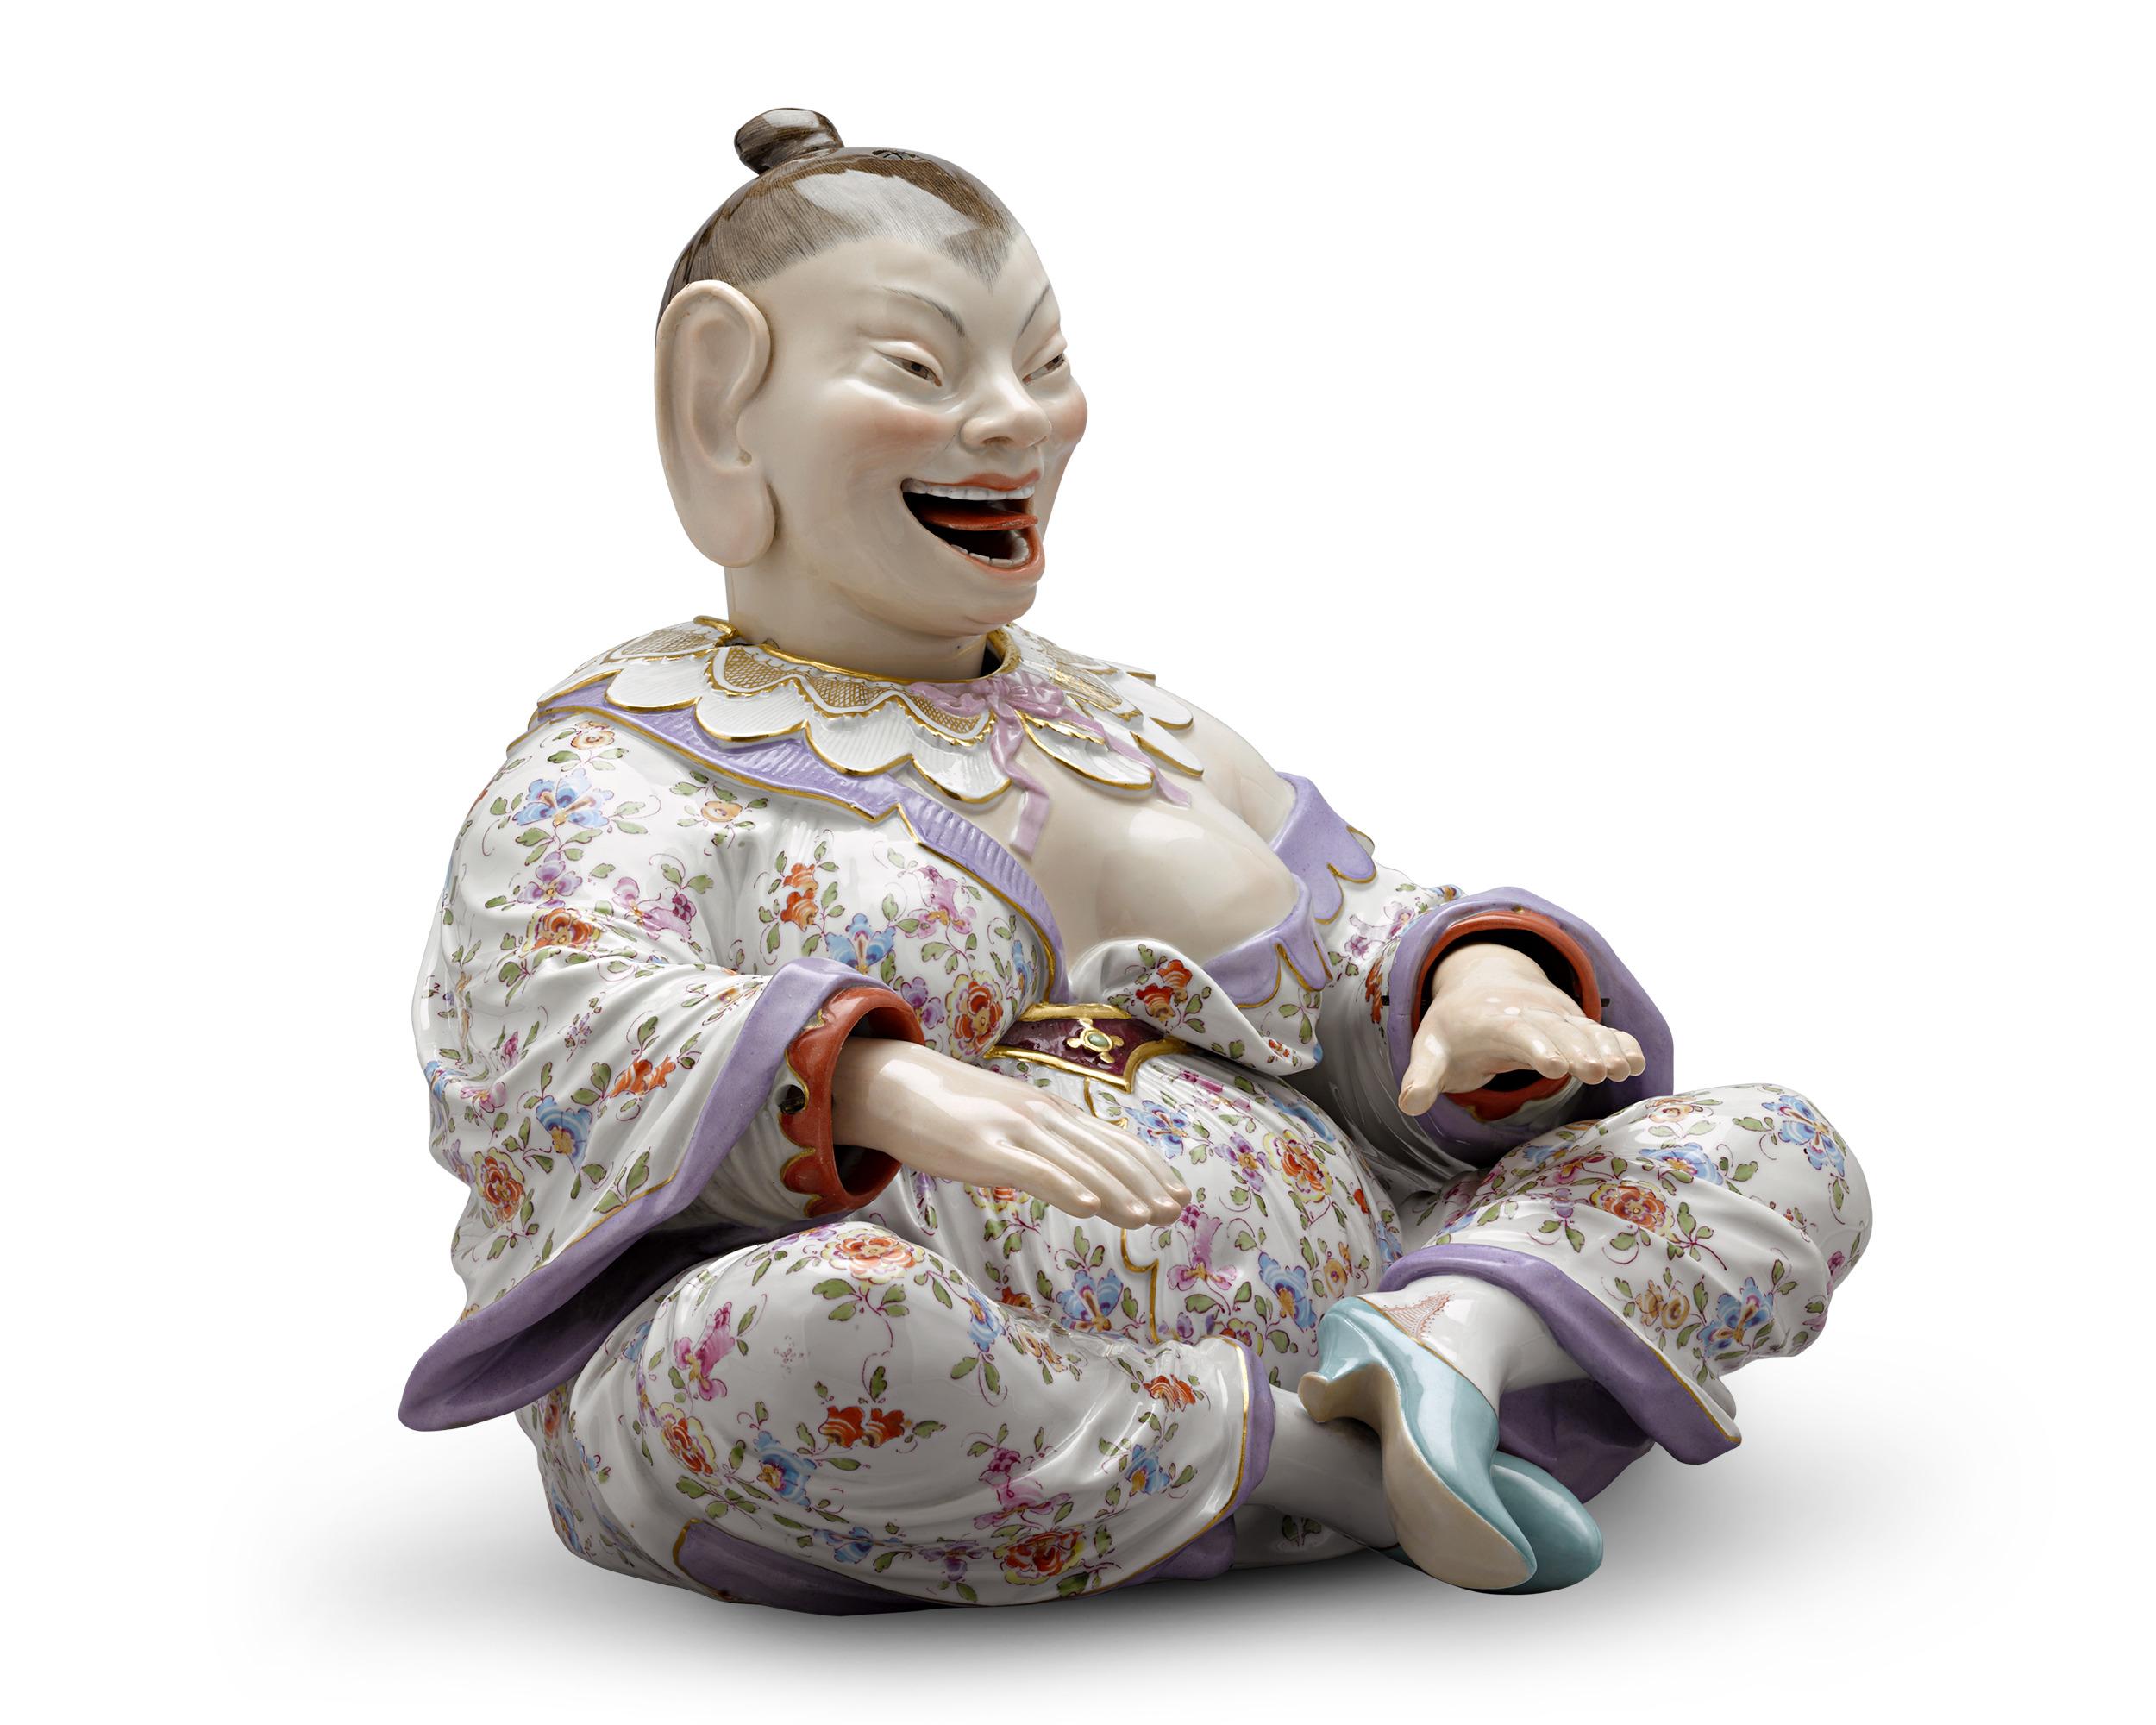 Crafted by the legendary Meissen, this charming porcelain nodder takes the form of an Asian woman in vividly hued garments. The perfectly balanced design includes hidden springs on the interior that set the figurine into motion with the slightest